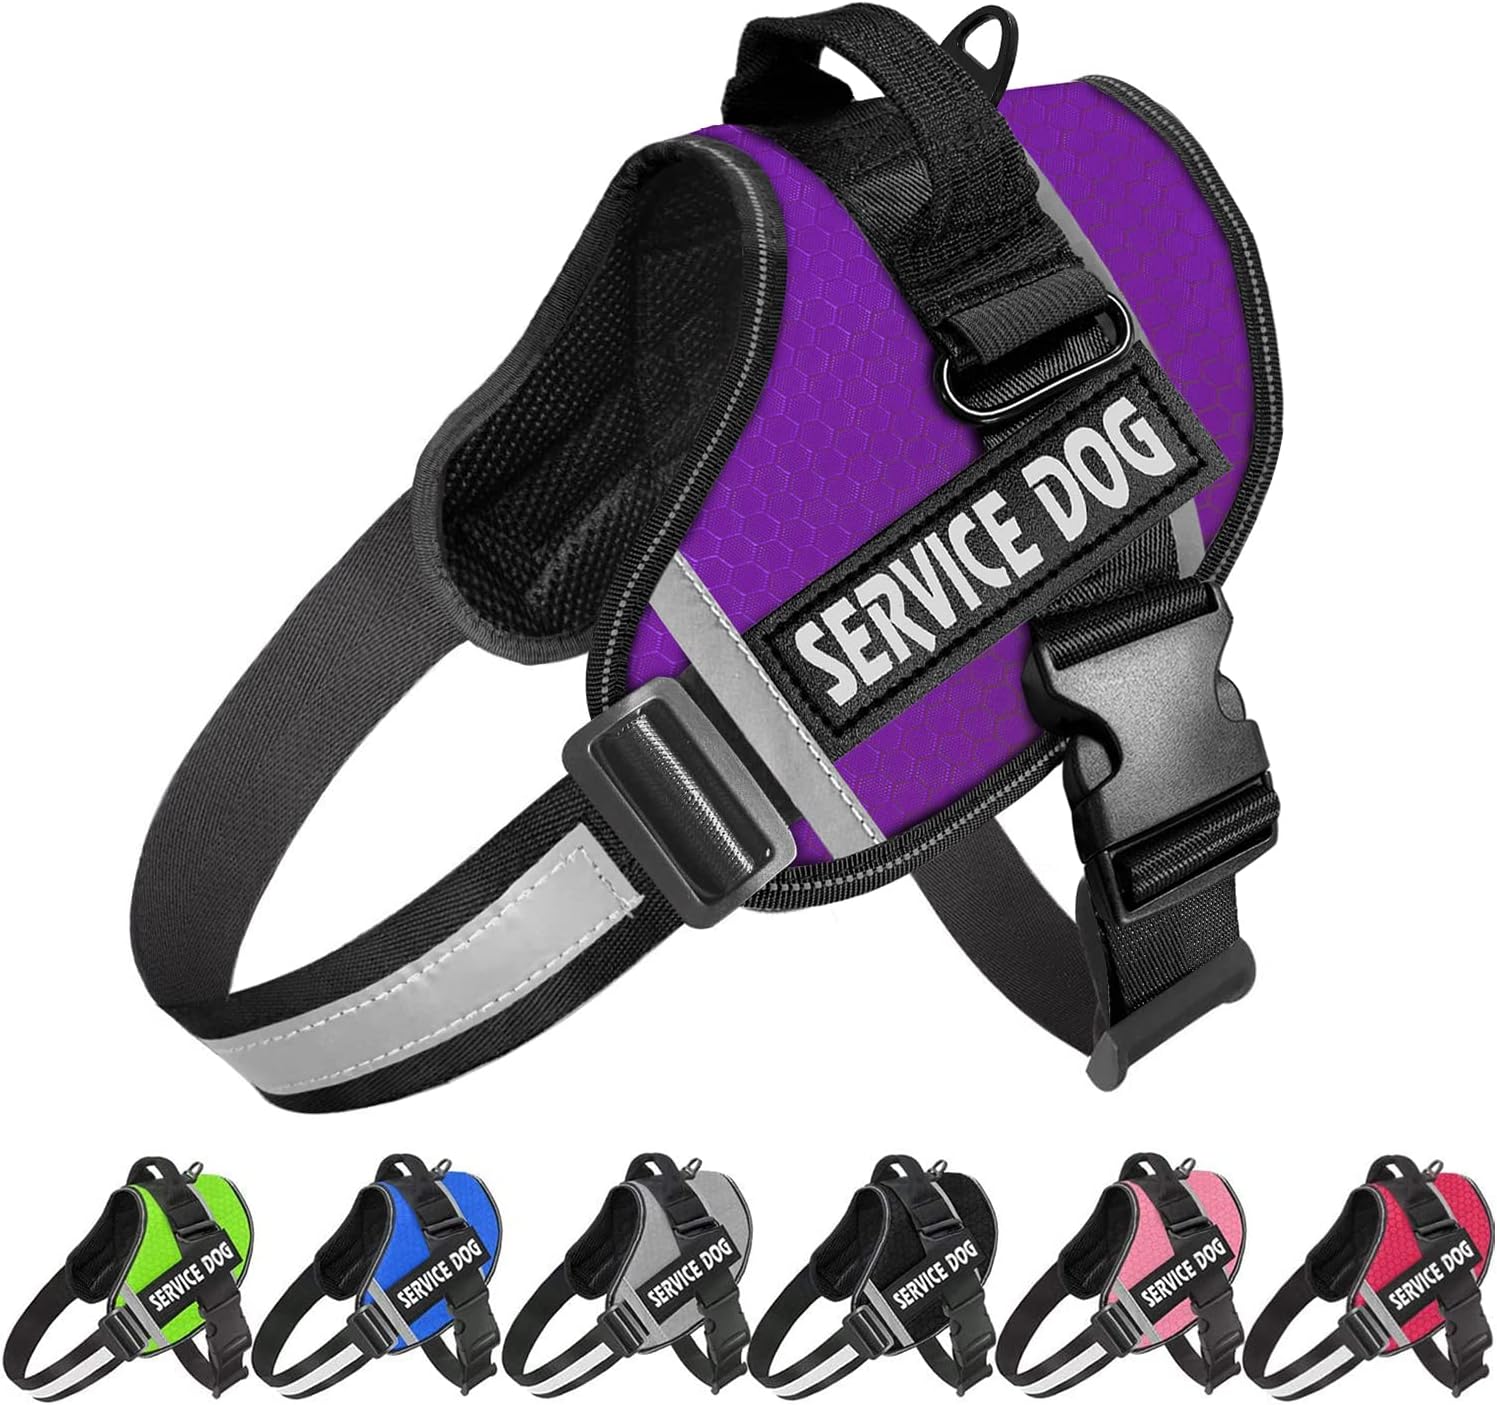 JSXD Dog Harness,No-Pull Service Dog Harness with Handle Adjustable Outdoor Pet Dog Vest 3M Reflective Nylon Material Vest for Breeds,Easy Control for Small Medium Large Dogs